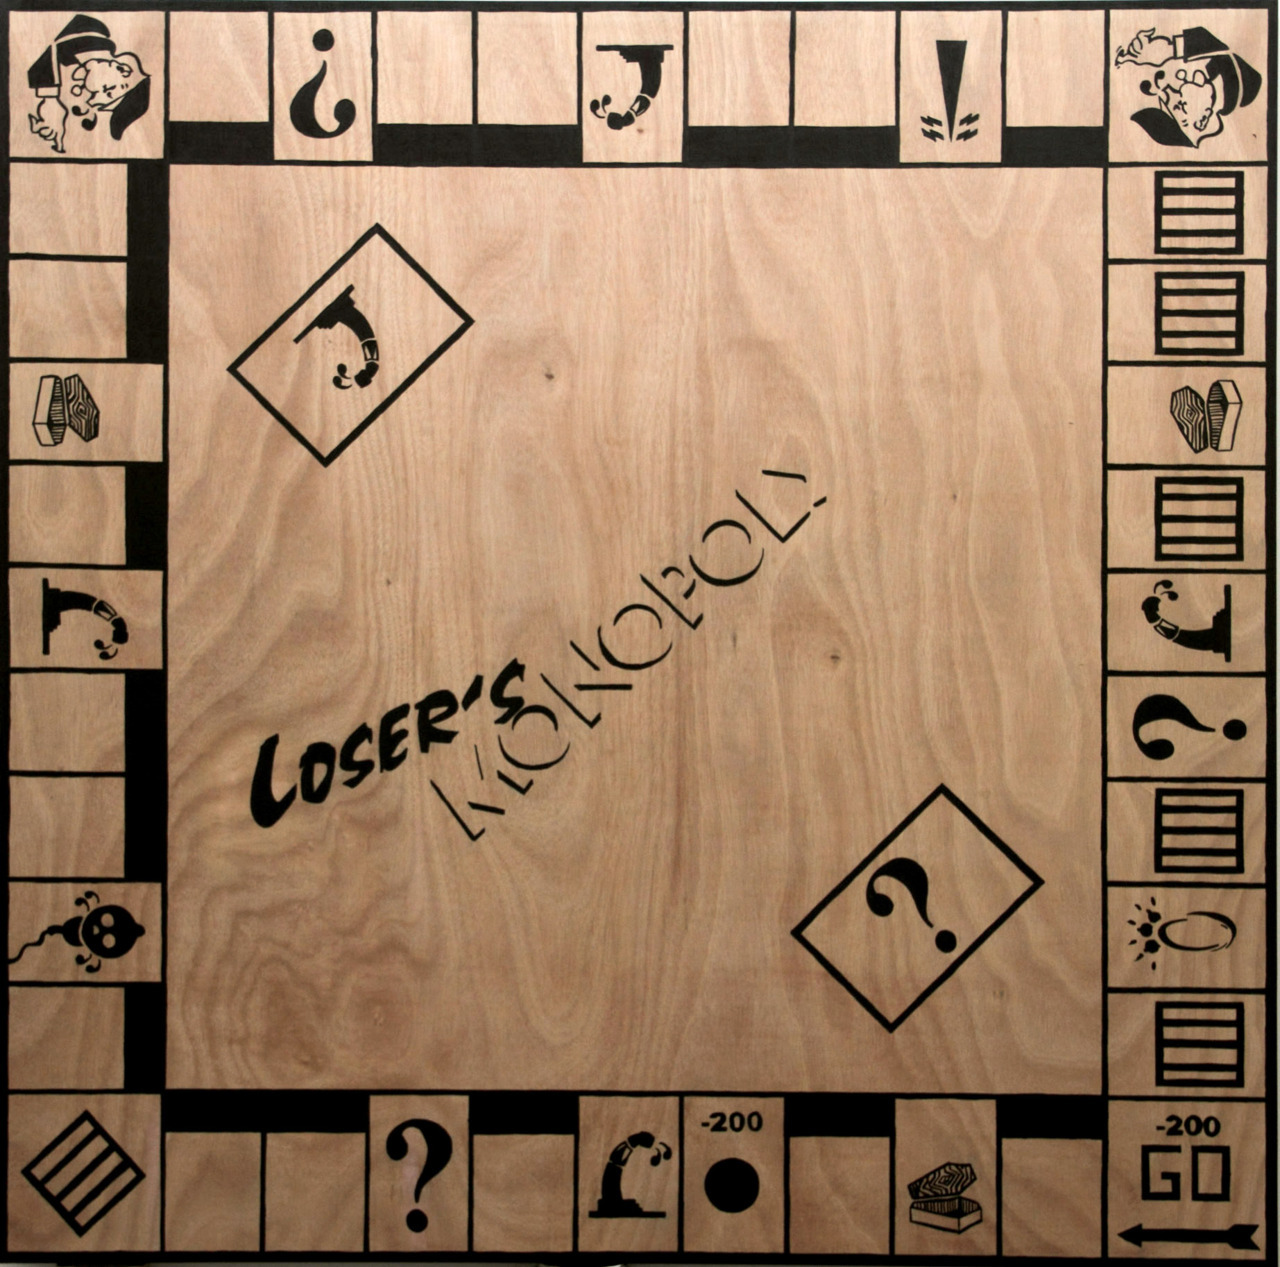 Loser’s Monopoly 1, acrylic on plywood, 2009